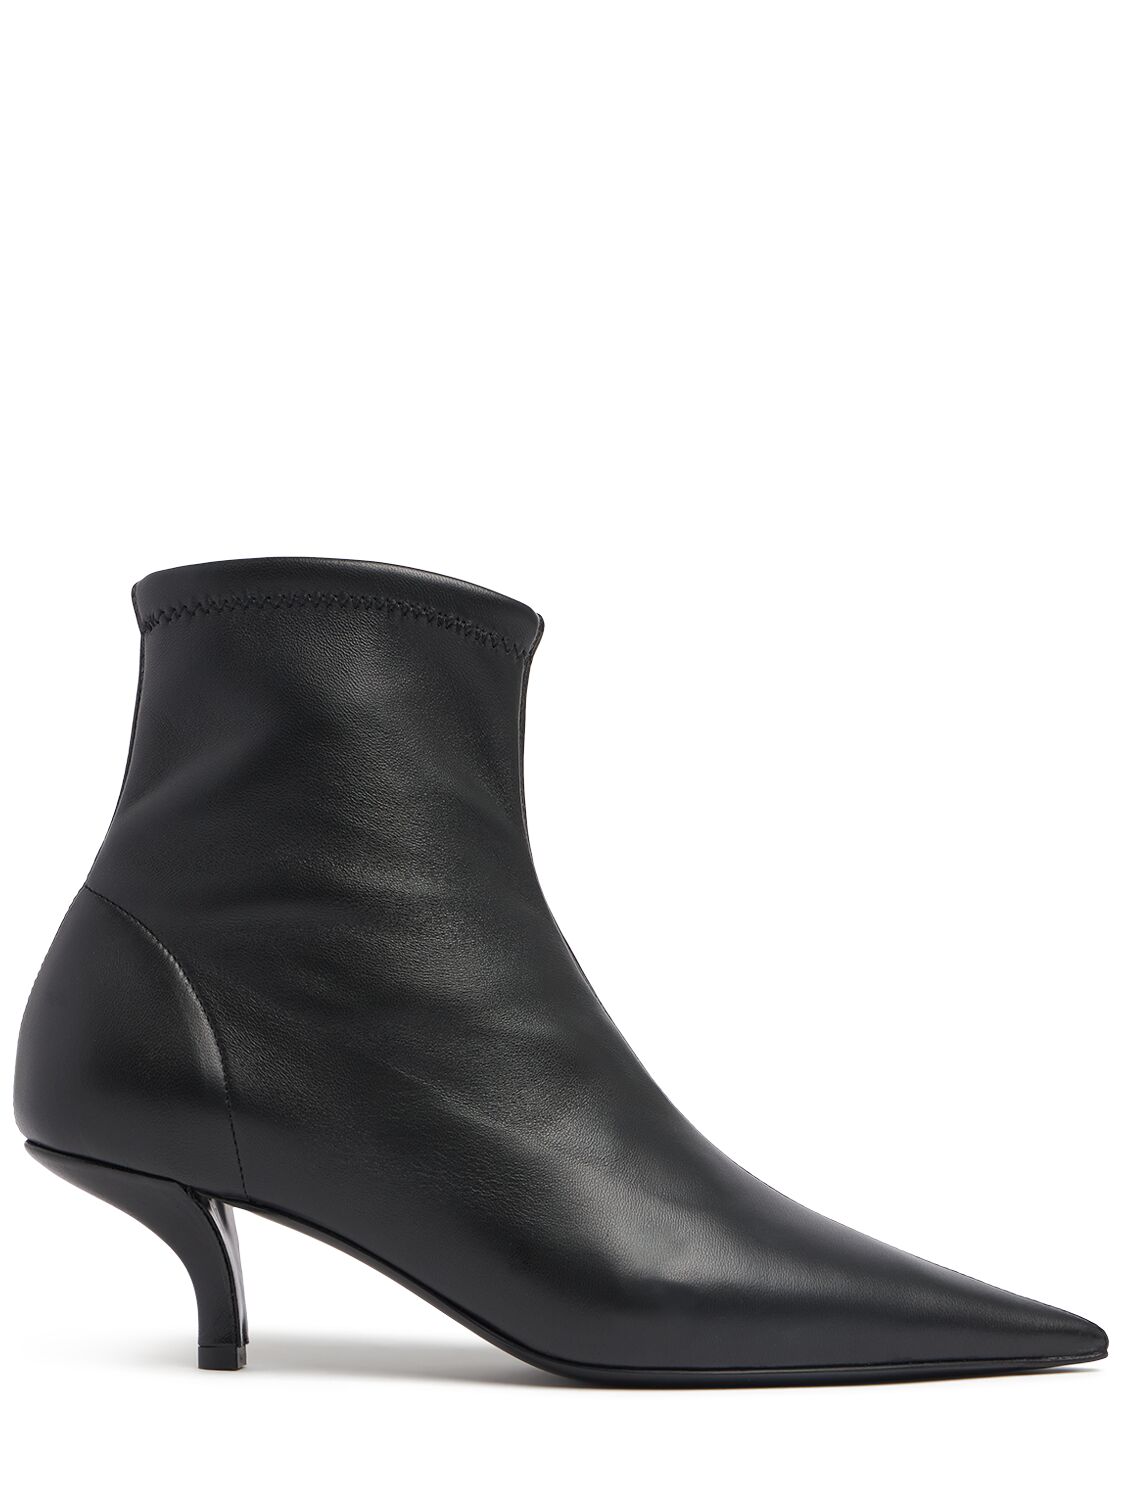 Totême 55mm The Heeled Sock Leather Boots In Black